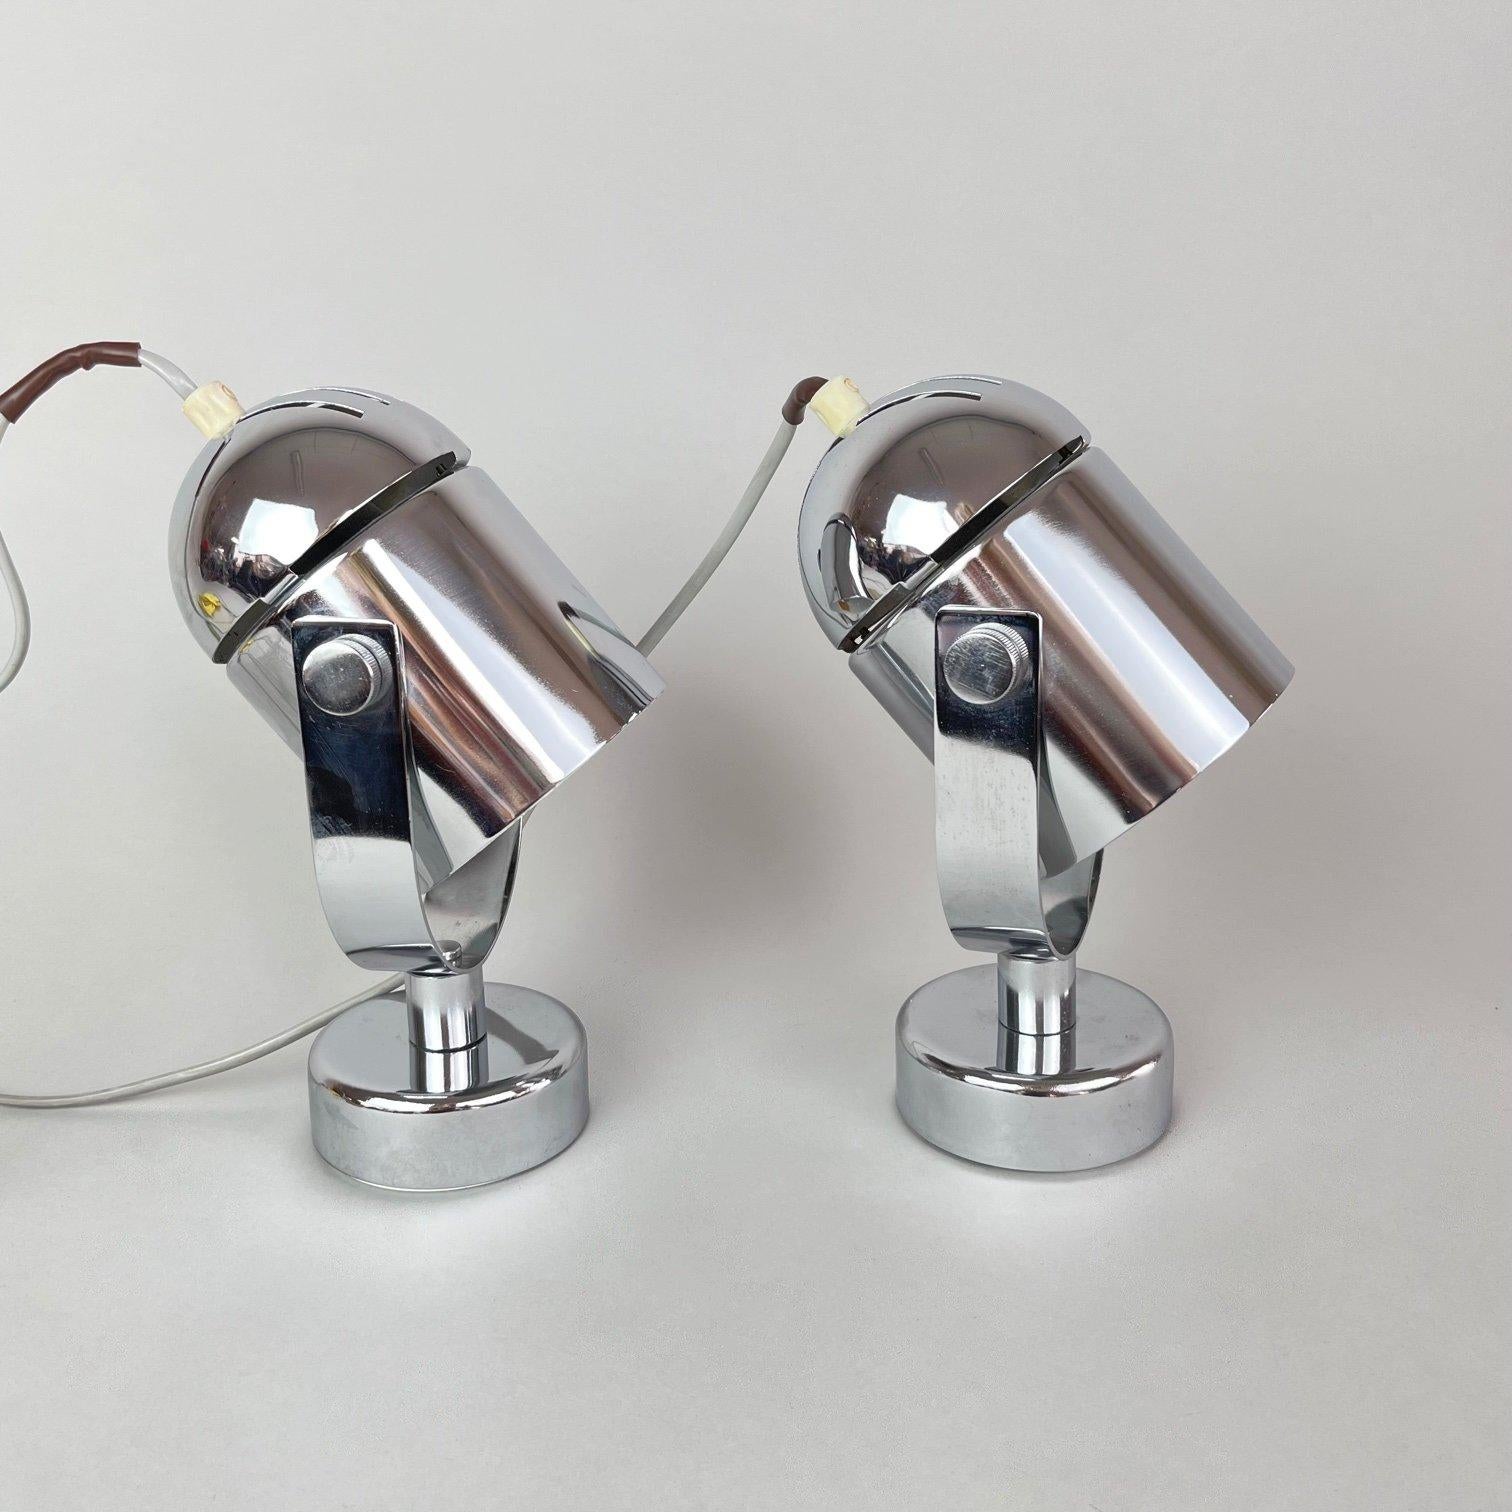 Pair of vintage chrome wall lamps designed by Stanislav Indra in former Czechoslovakia in the 1970's. Very good vintage condition. Original wiring, fully functional. 
Bulbs: 2 x 1 E27 or E26.